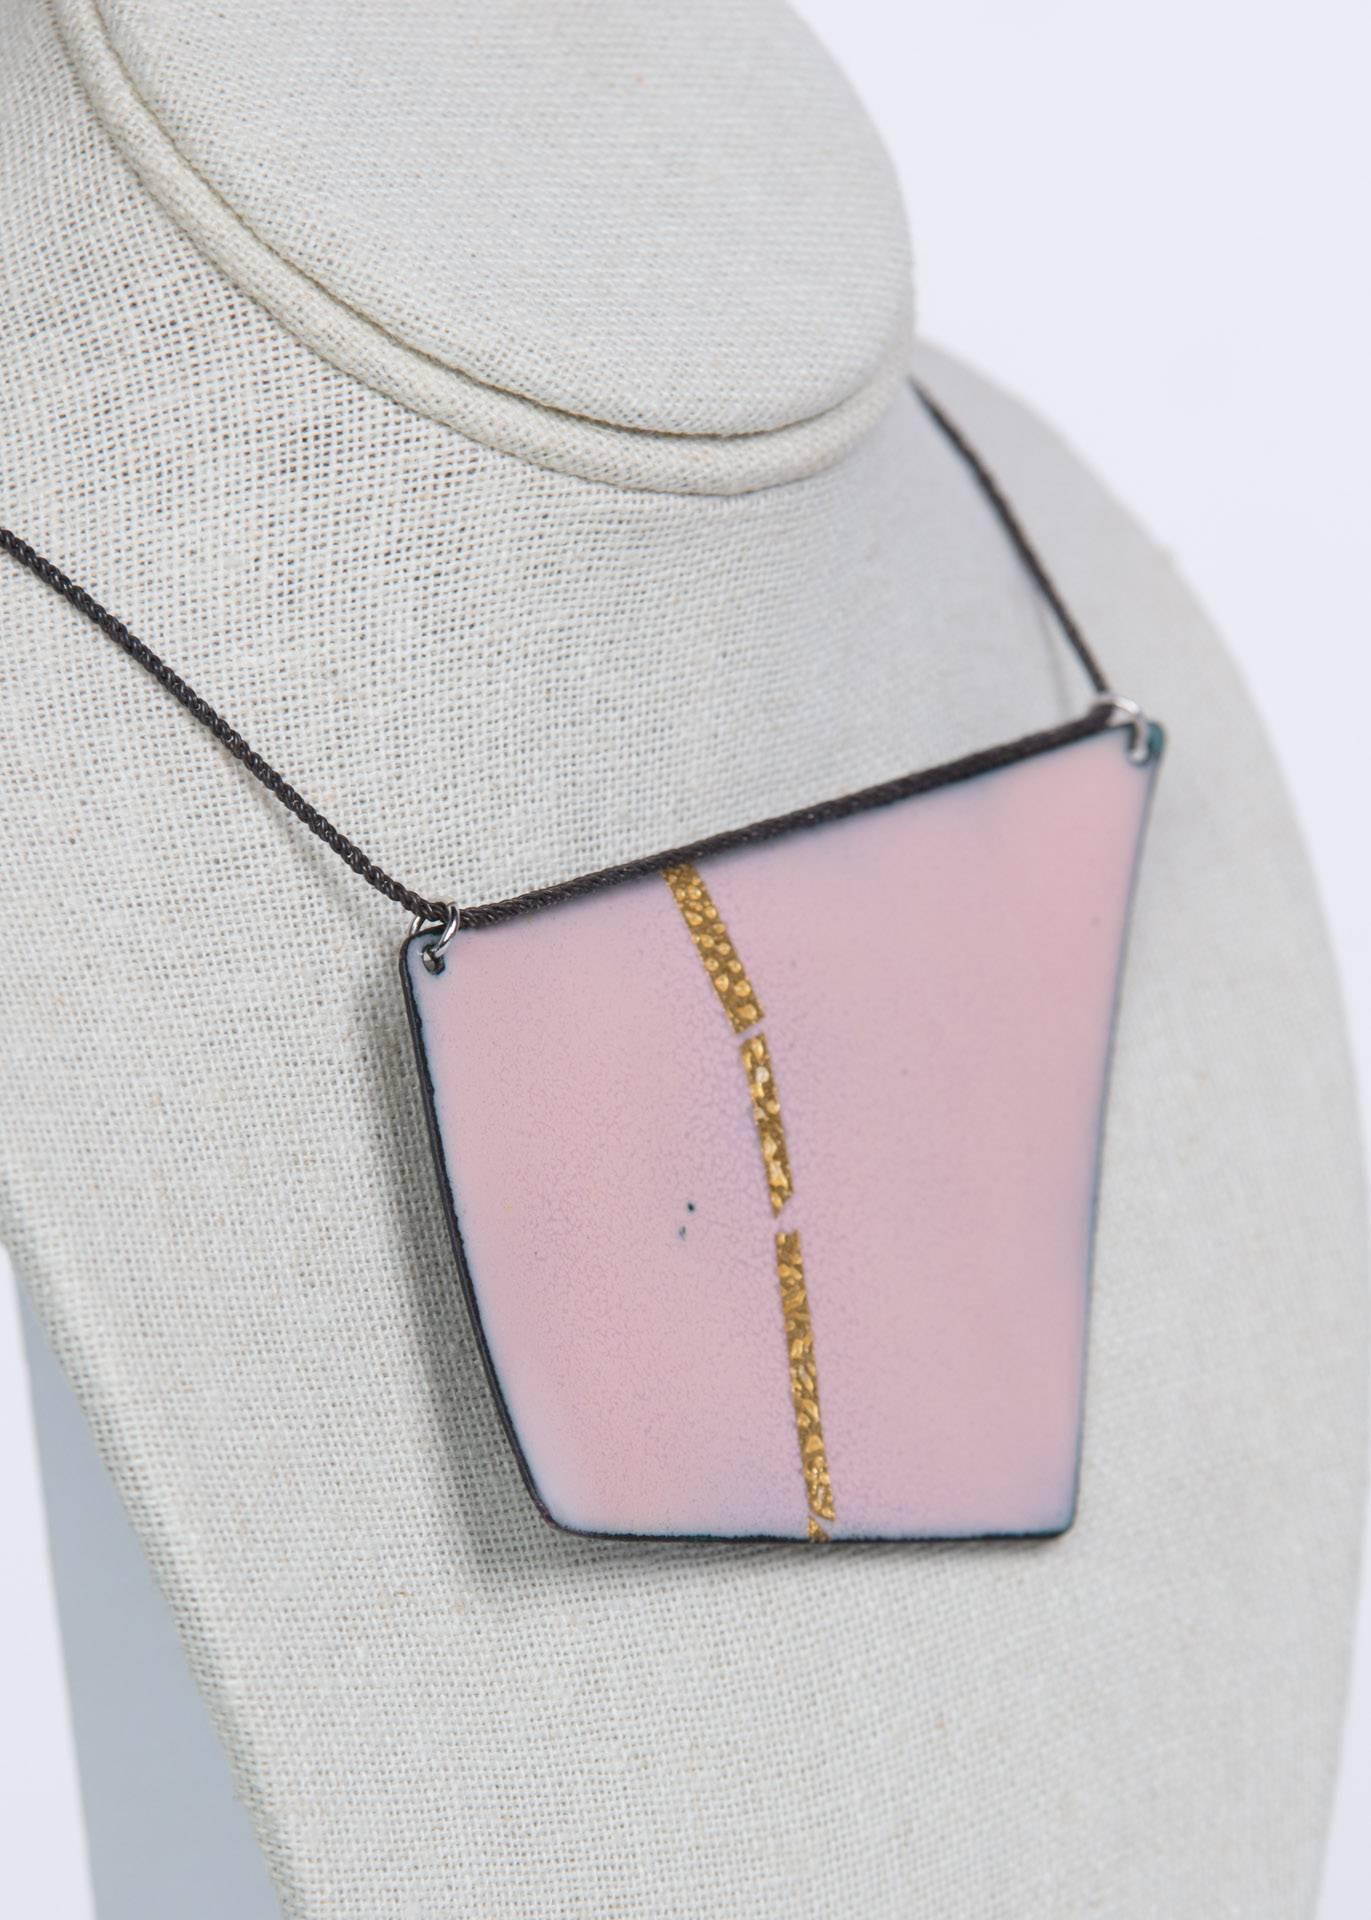 Women's Michel McNabb for Basha Gold Reversible Blue and Pink Quadrilateral Necklace For Sale